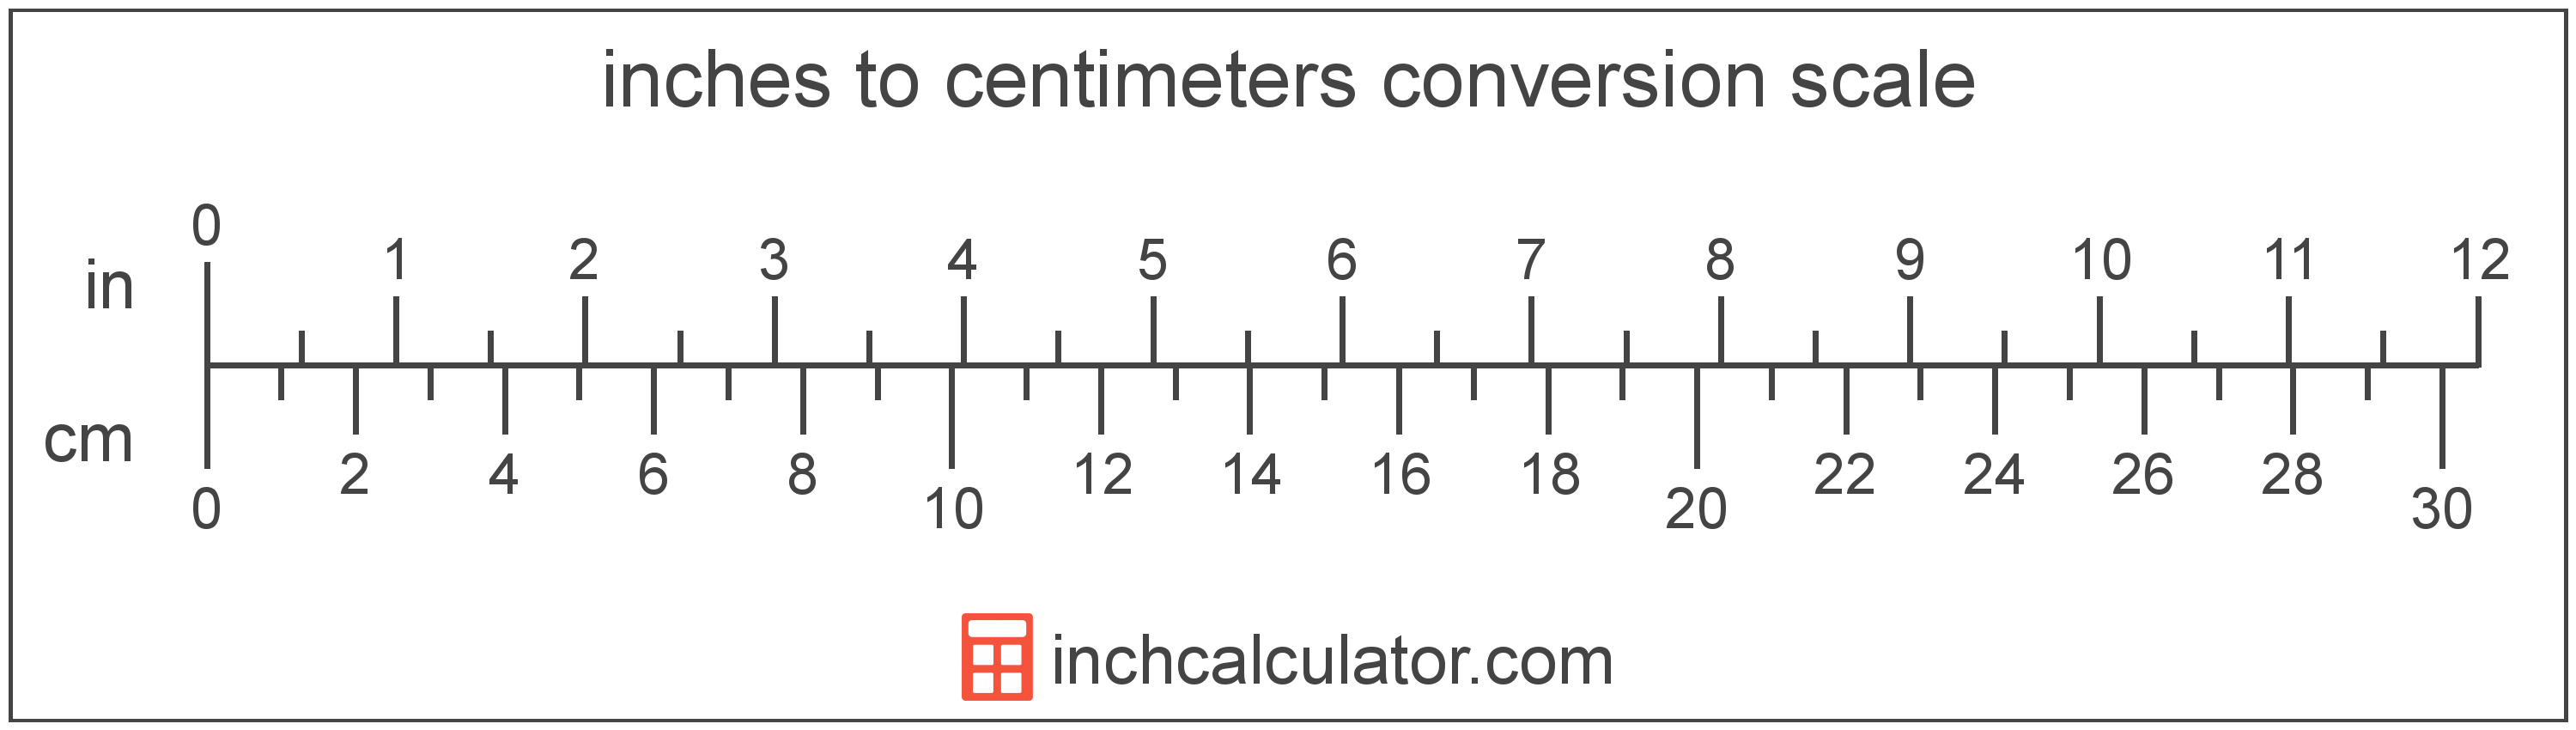 Cm To Inches Conversion (Centimeters To Inches)